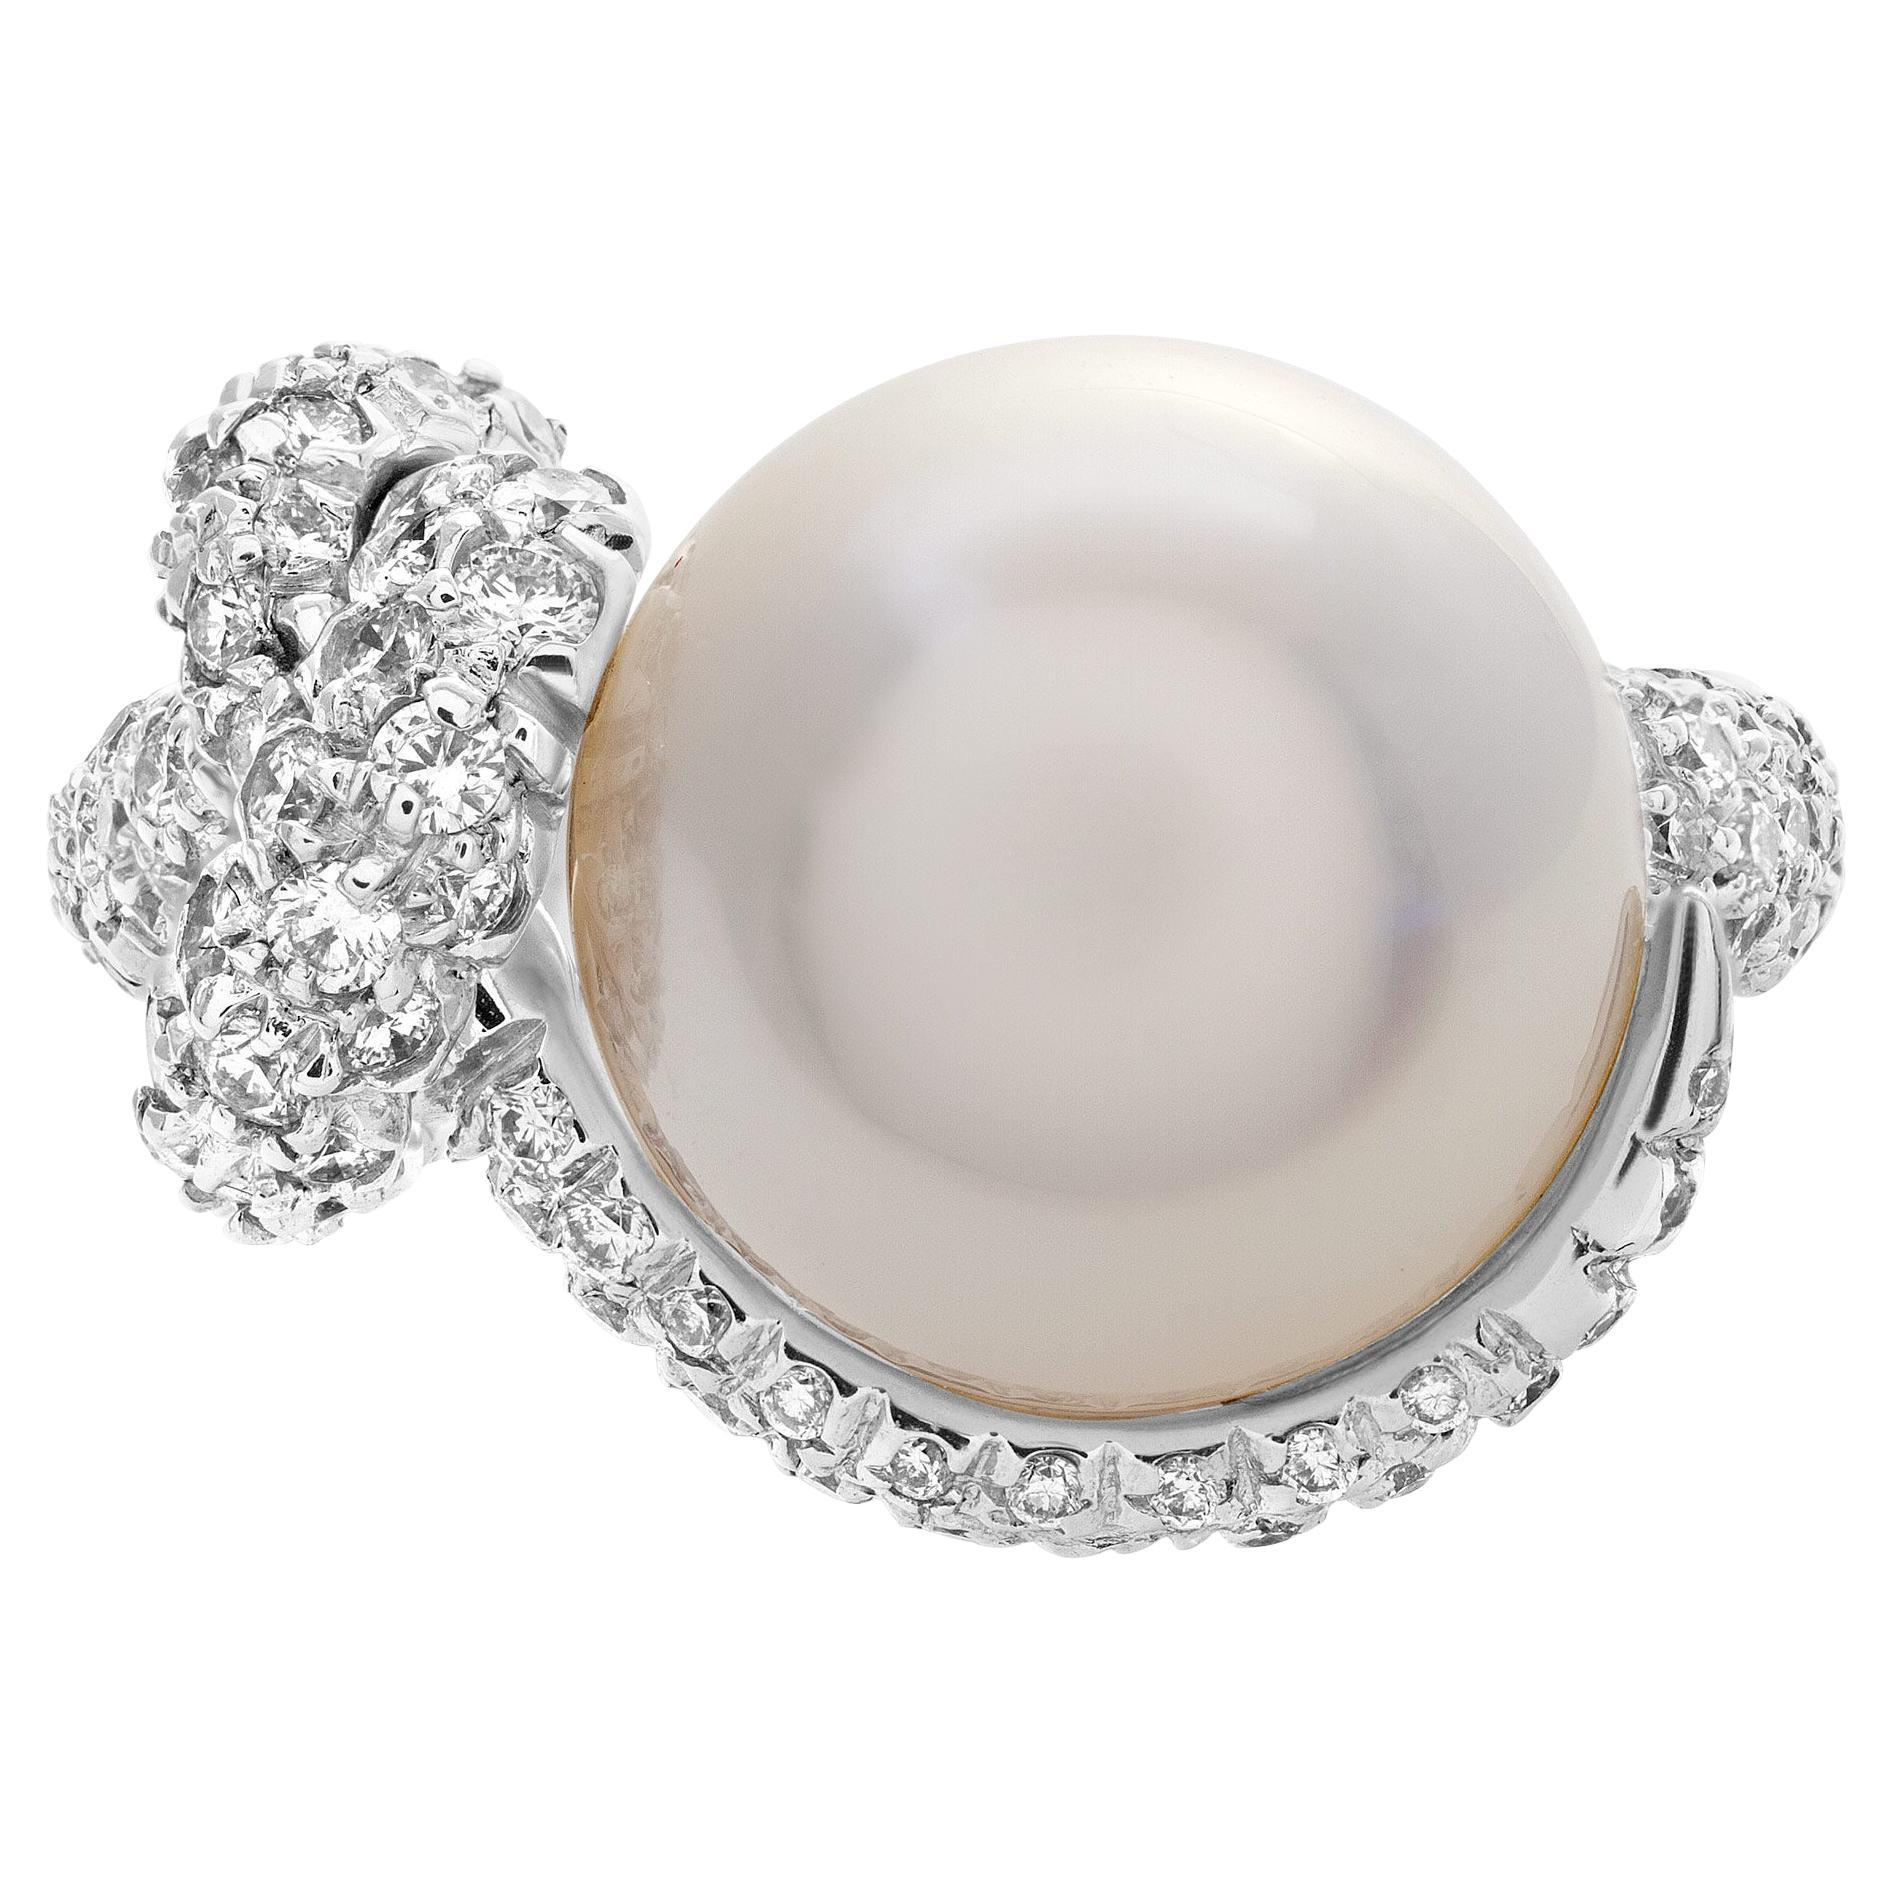 Mikimoto Milano South Sea Cultured Pearl Ring with High Grade, Excellent Luster For Sale